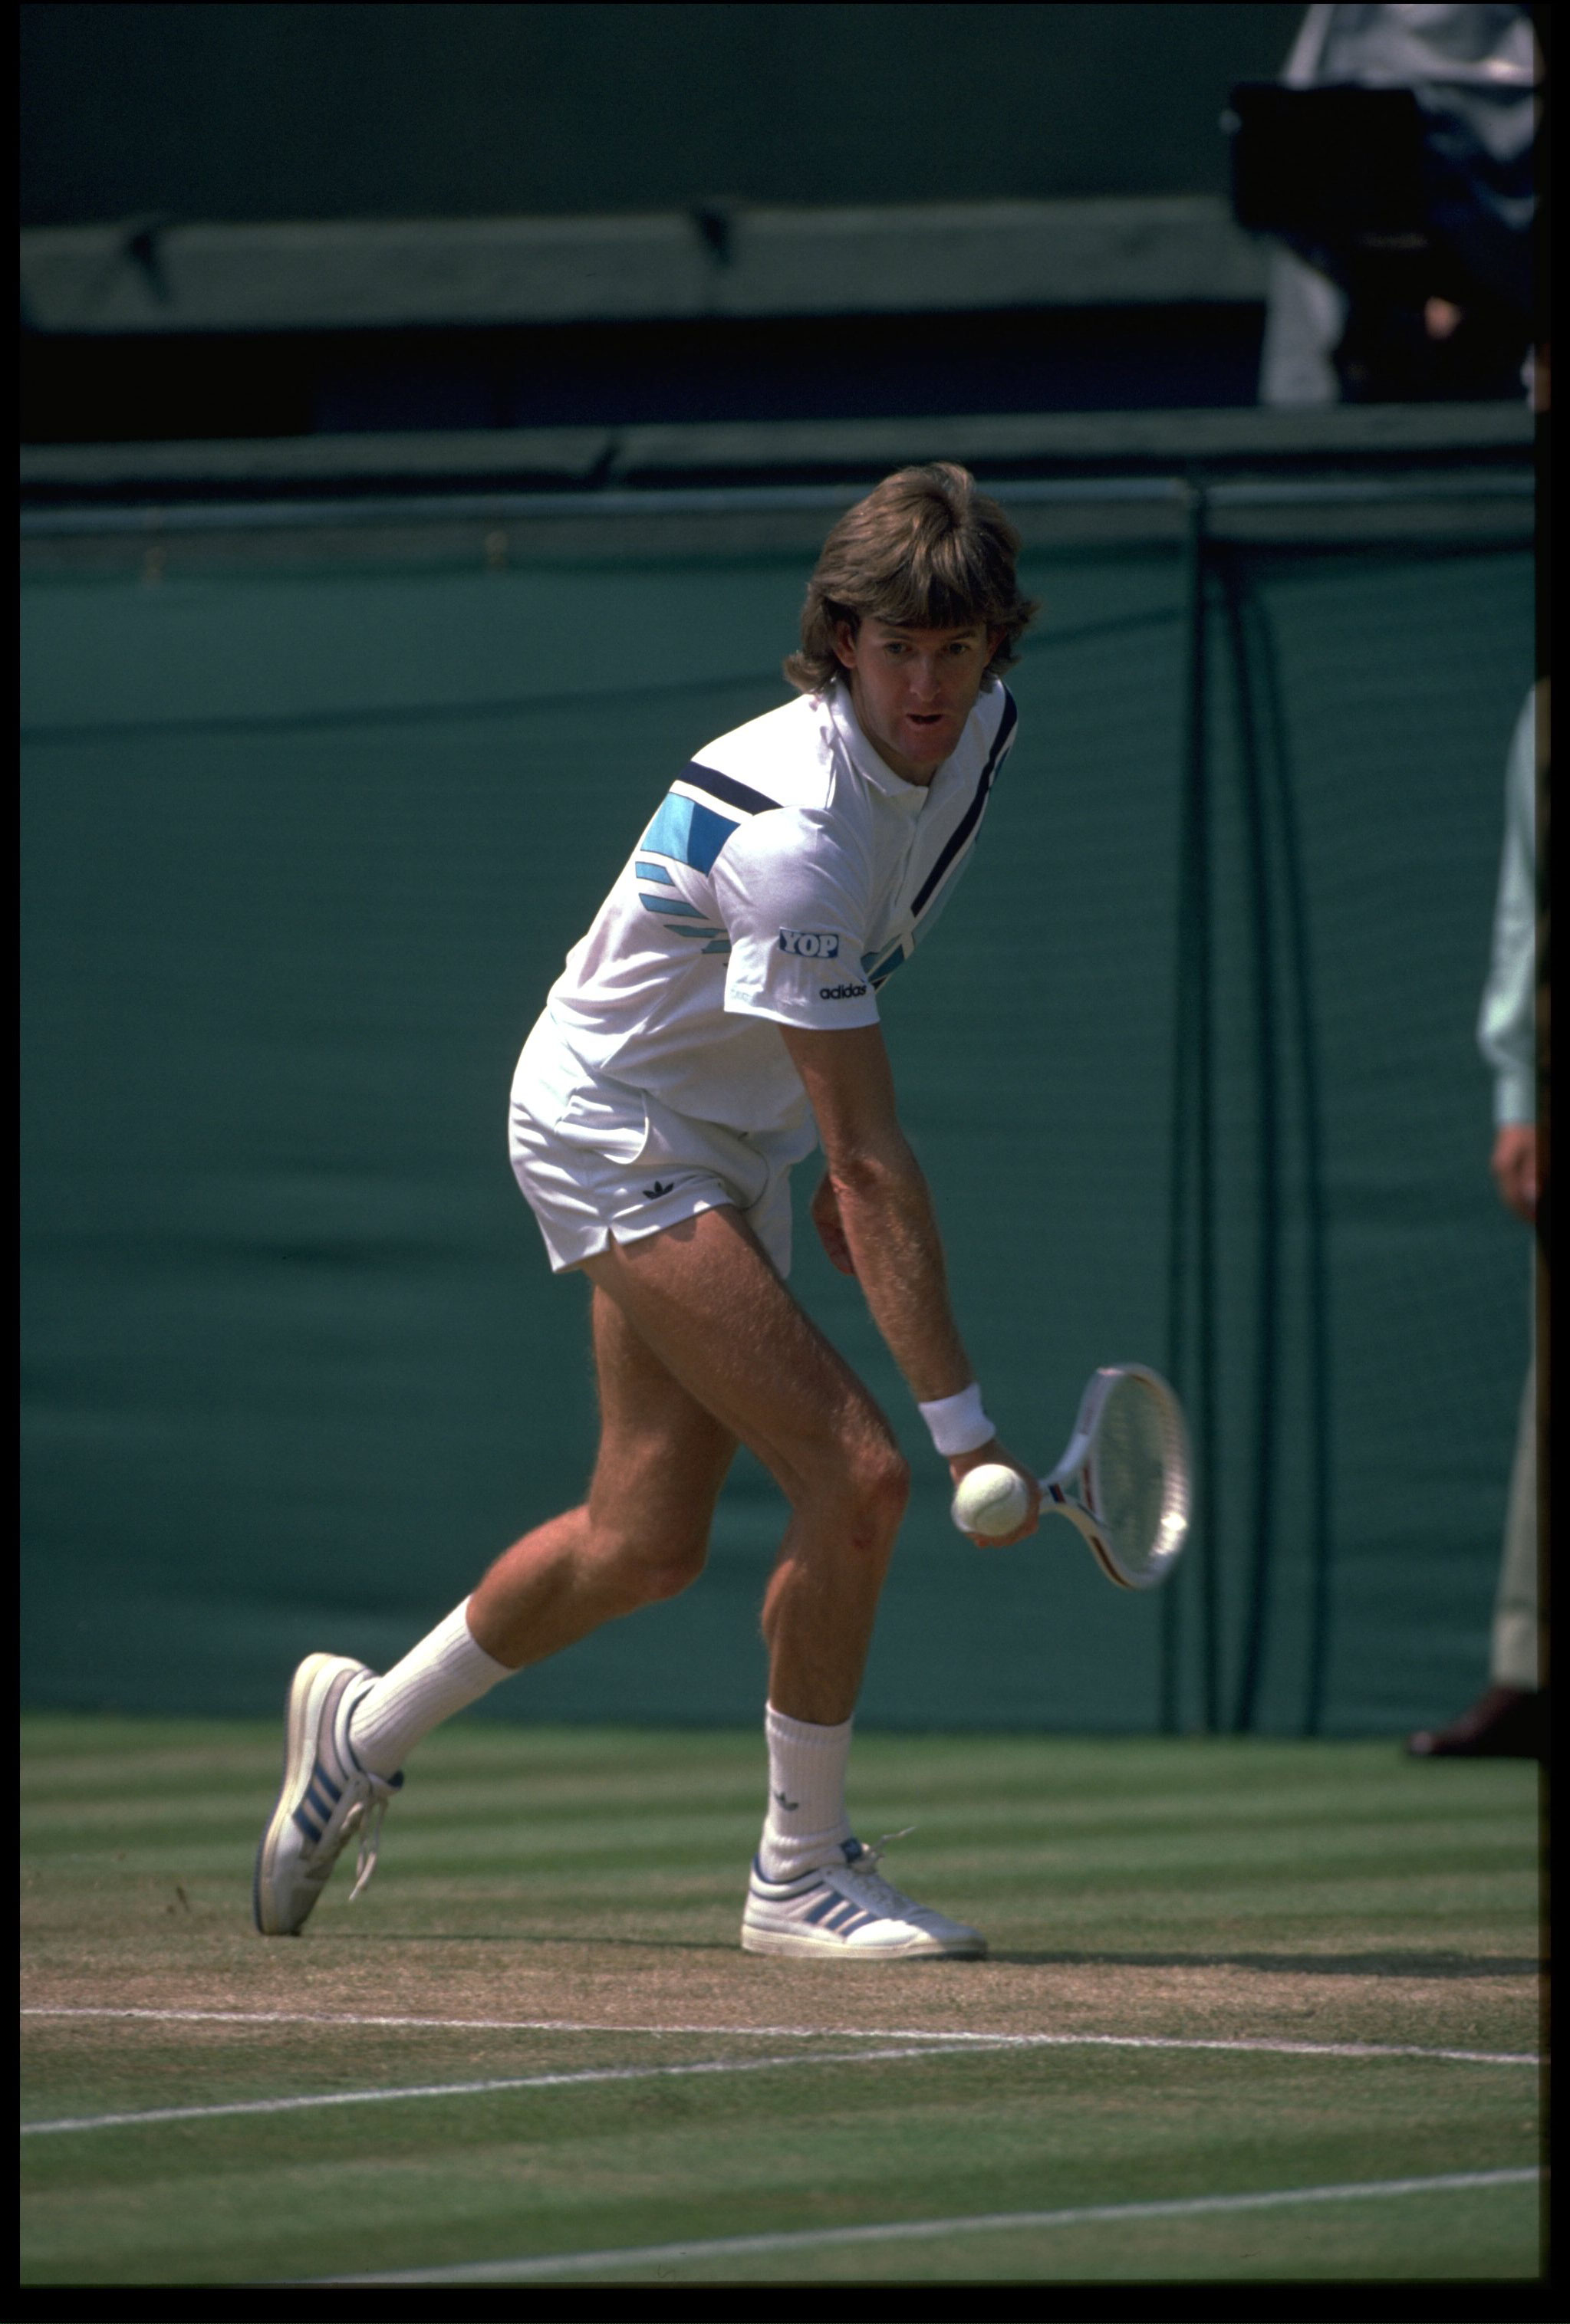 JUN 1985: KEVIN CURREN OF THE UNITED STATES IN ACTION DURING THE MENS SINGLES AT WIMBLEDON.